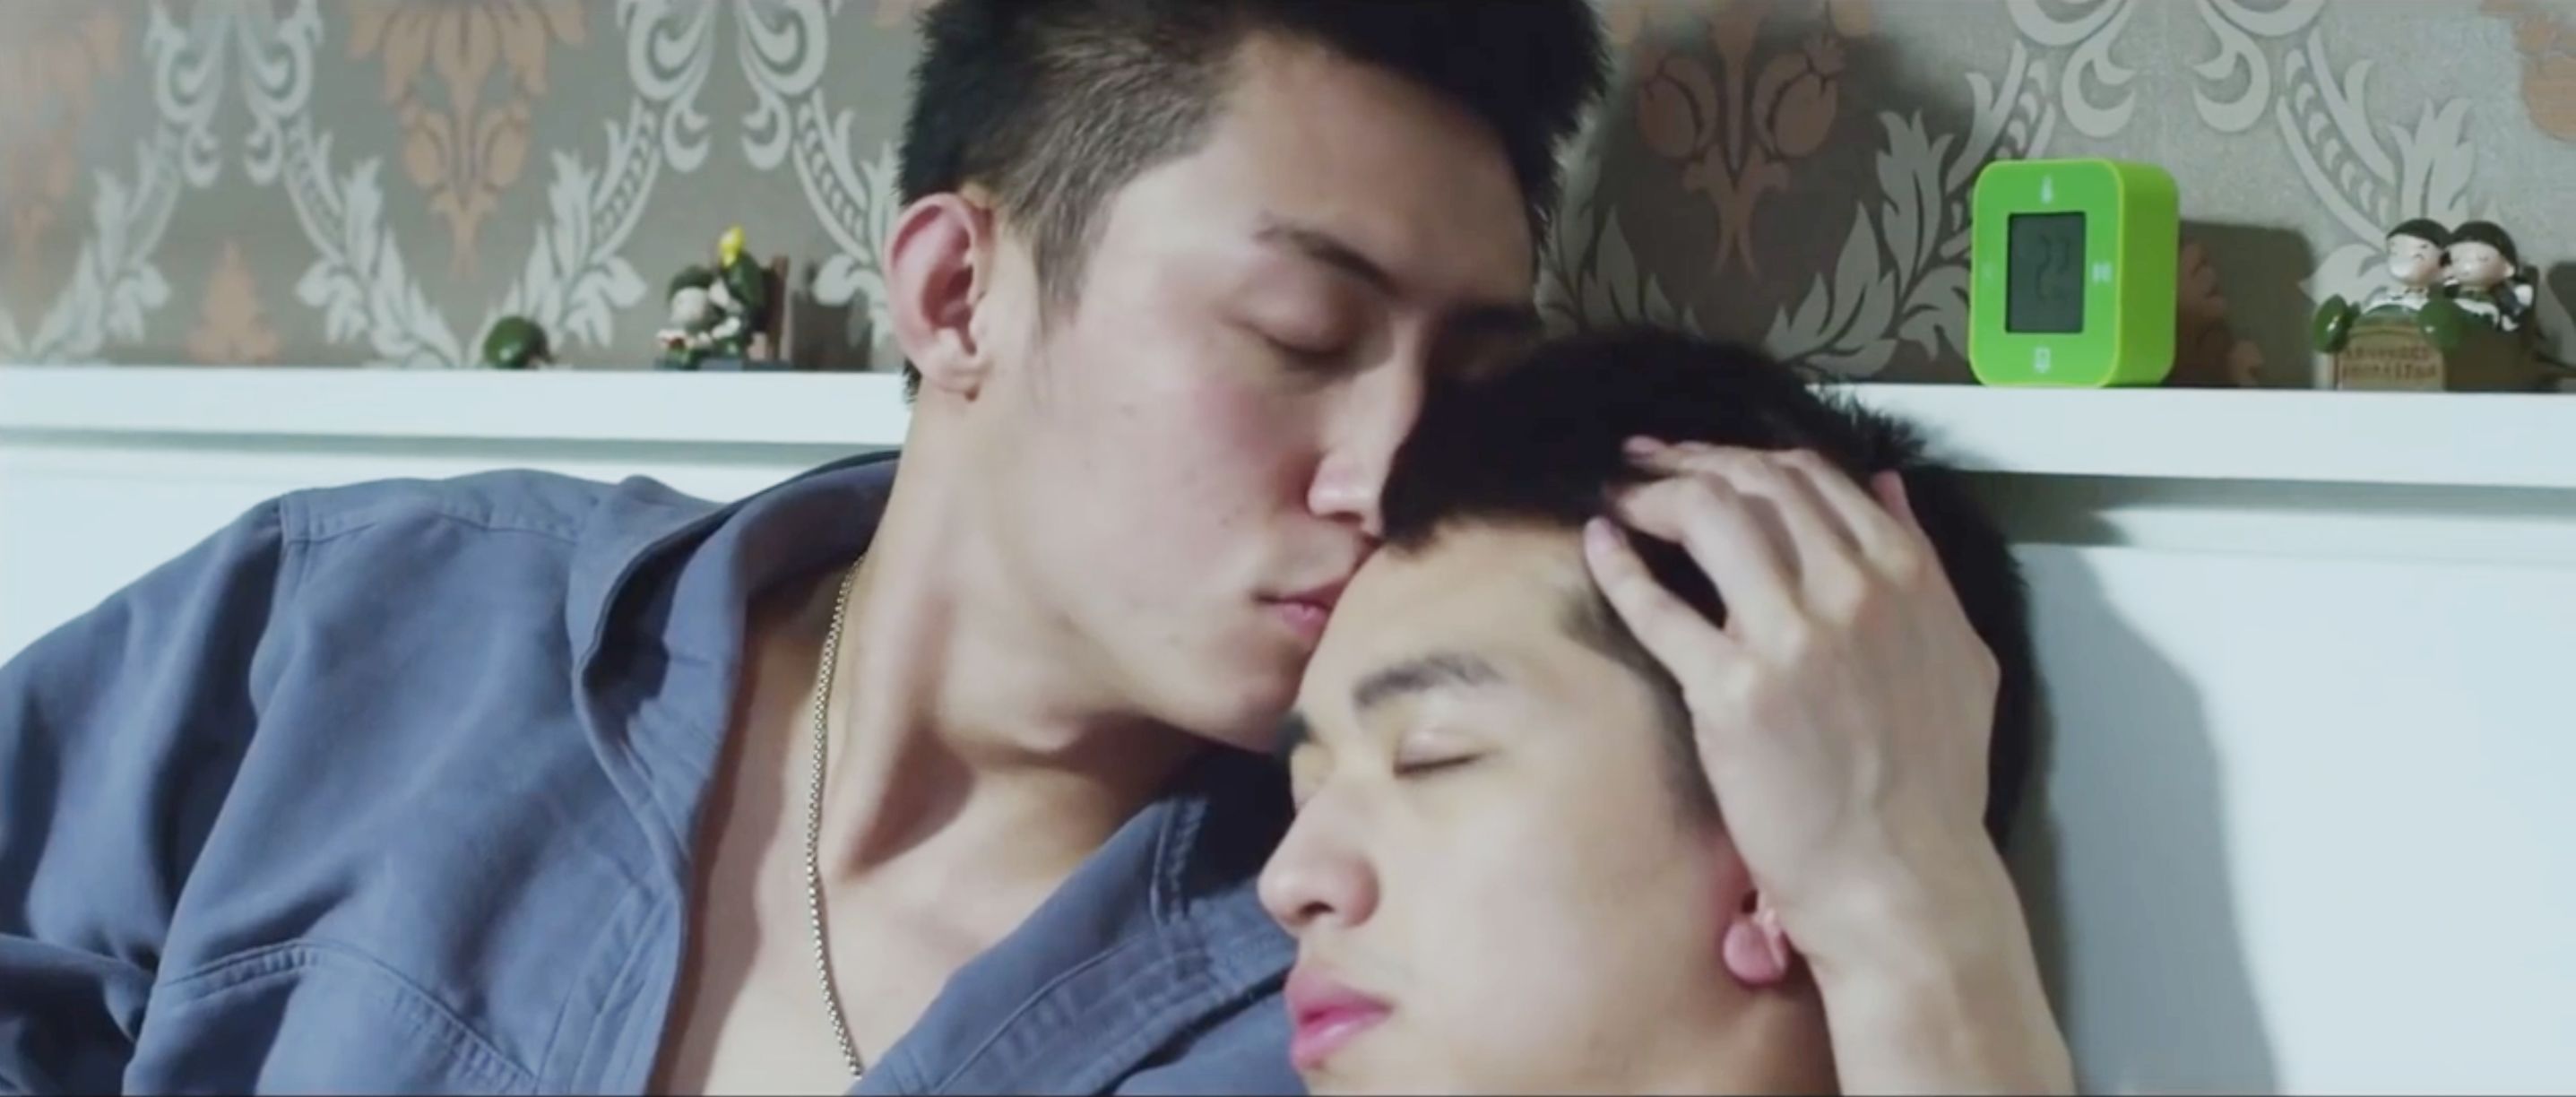 Xxx Porn Chinese While Sleeping - China bans same-sex romance from TV screens | CNN